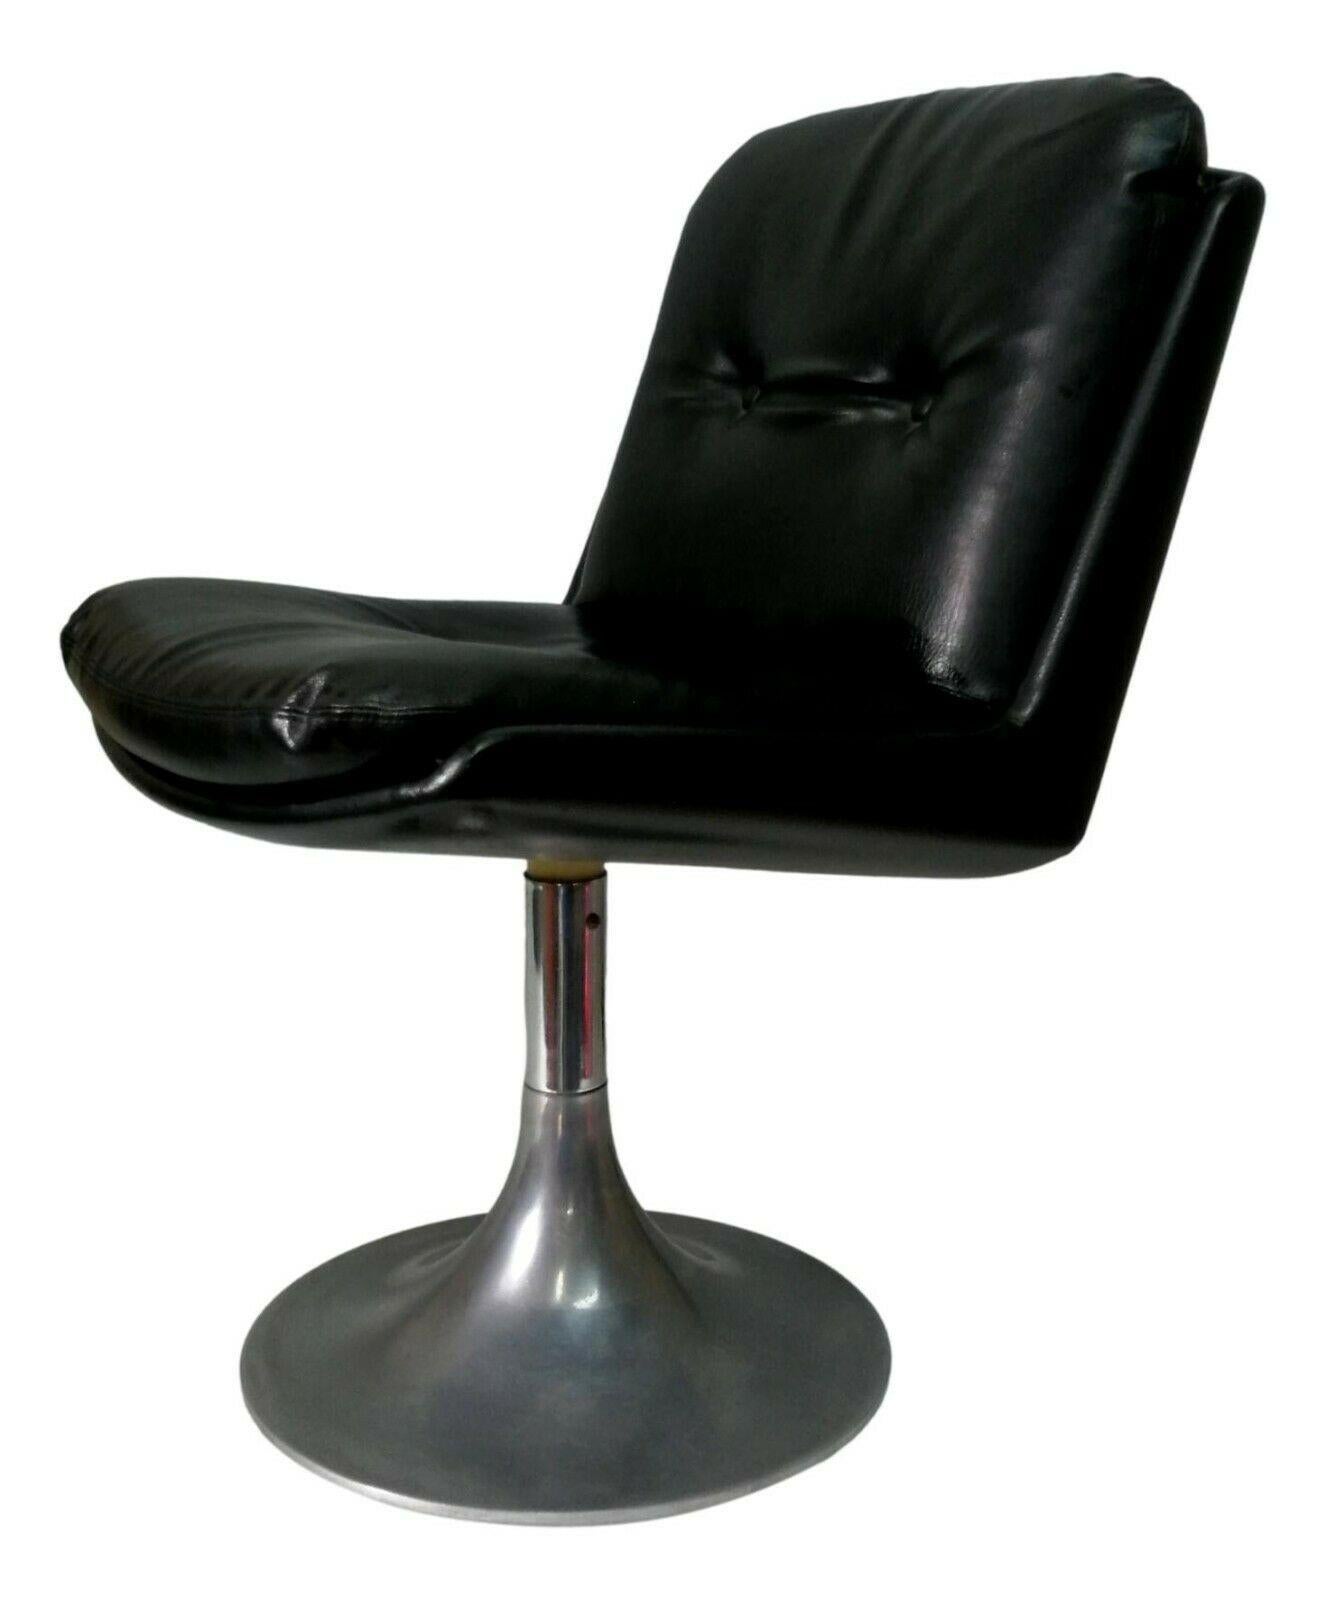 original chair from the 70s, made on an aluminum tulip base, black leather (or eco-leather) shell

in the style of Joe Colombo or Eero Saarinen

It measures 76 cm in height, 50 cm in width, 54 cm in depth, in very good storage conditions, as